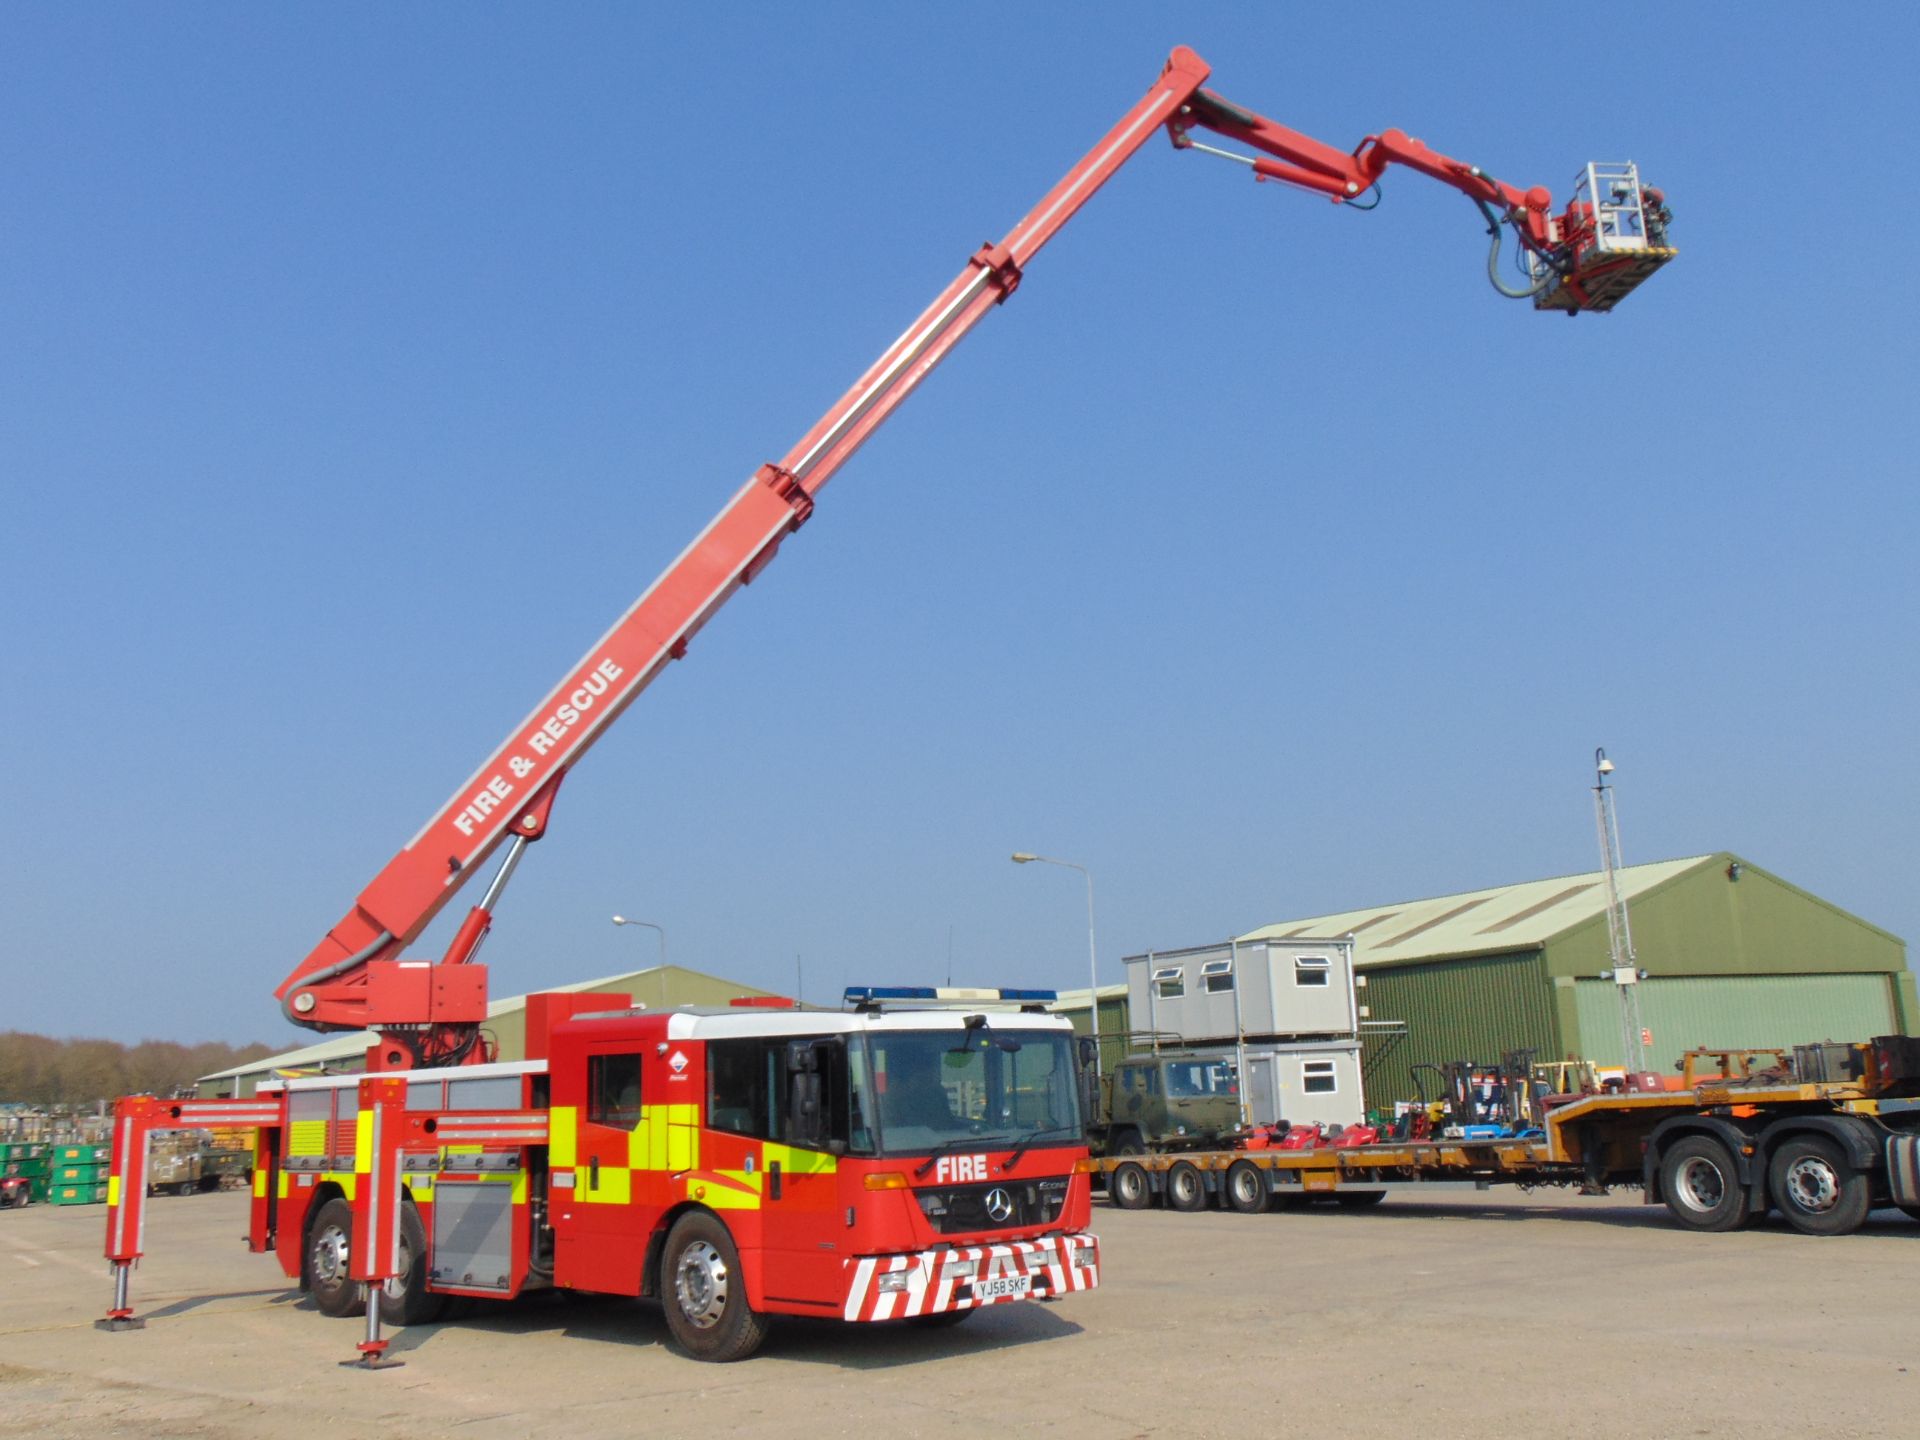 2008 Mercedes Econic CARP (Combined Aerial Rescue Pump) 6x2 Aerial Work Platform / Fire Appliance - Image 7 of 49